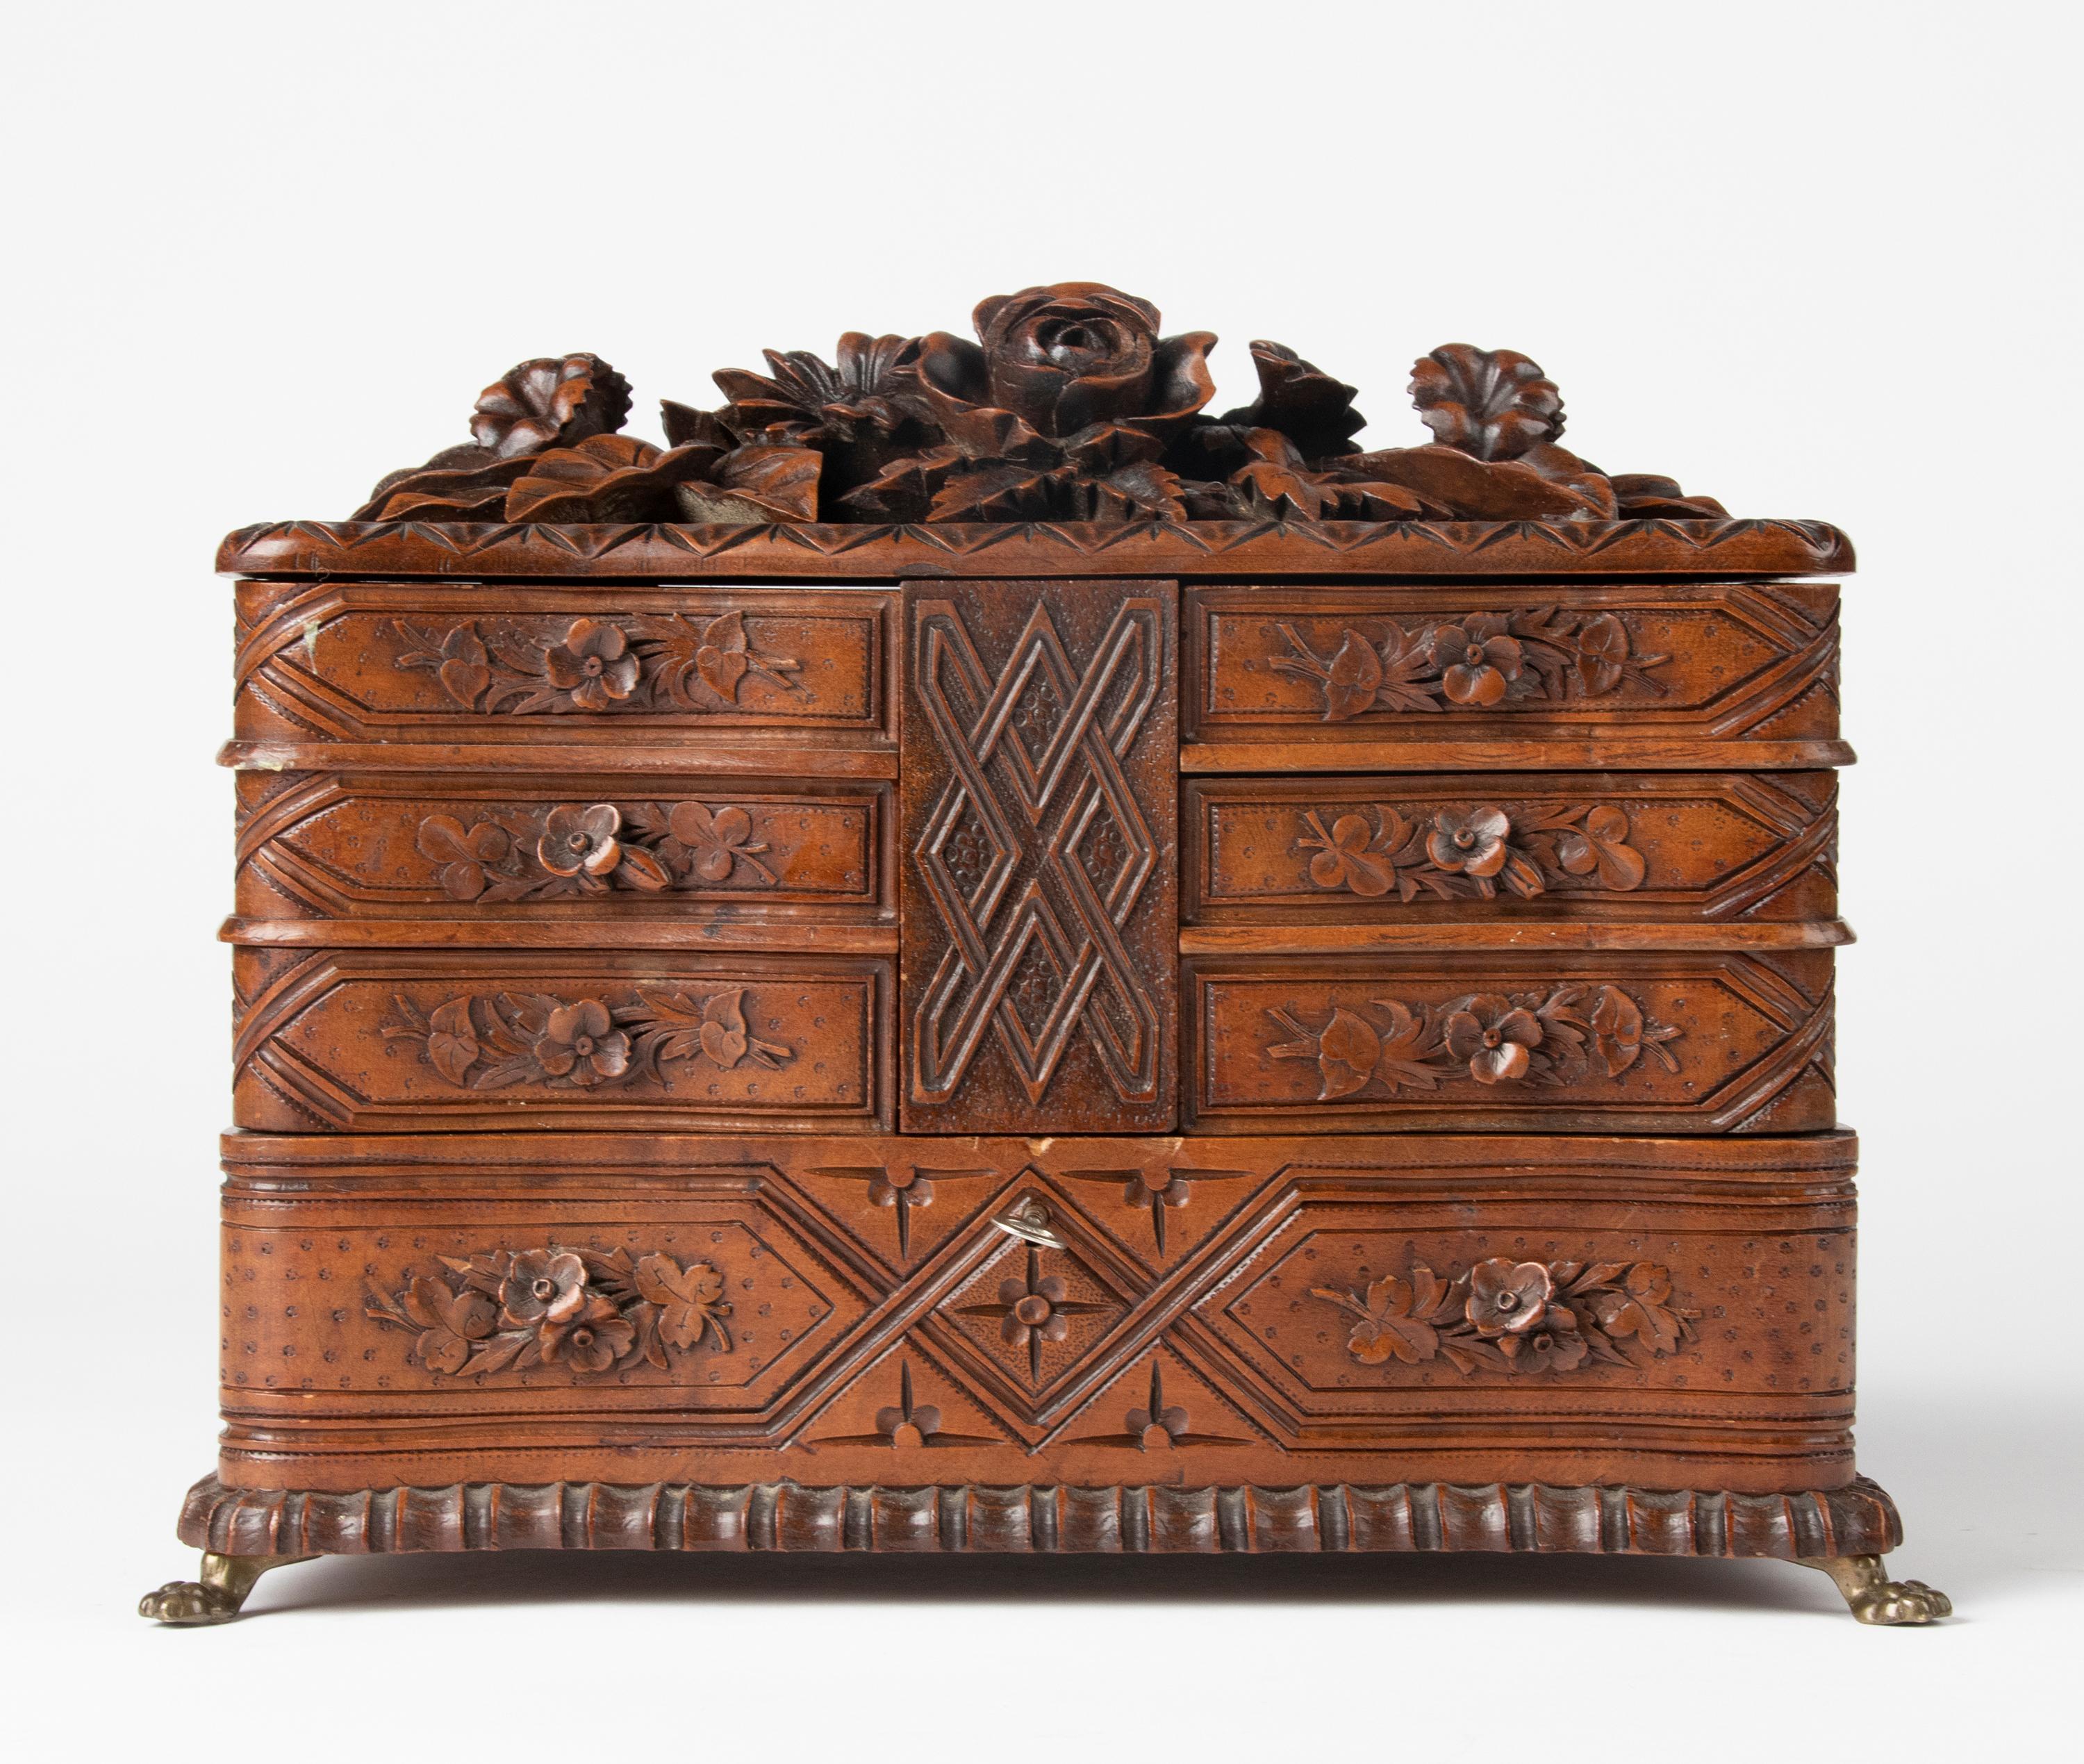 Beautiful wooden Black Forest chest, made of walnut. The chest has beautiful refined carvings with flowers and leaves. The box stands on copper claw feet. This object is in good condition and has a nice old patina.